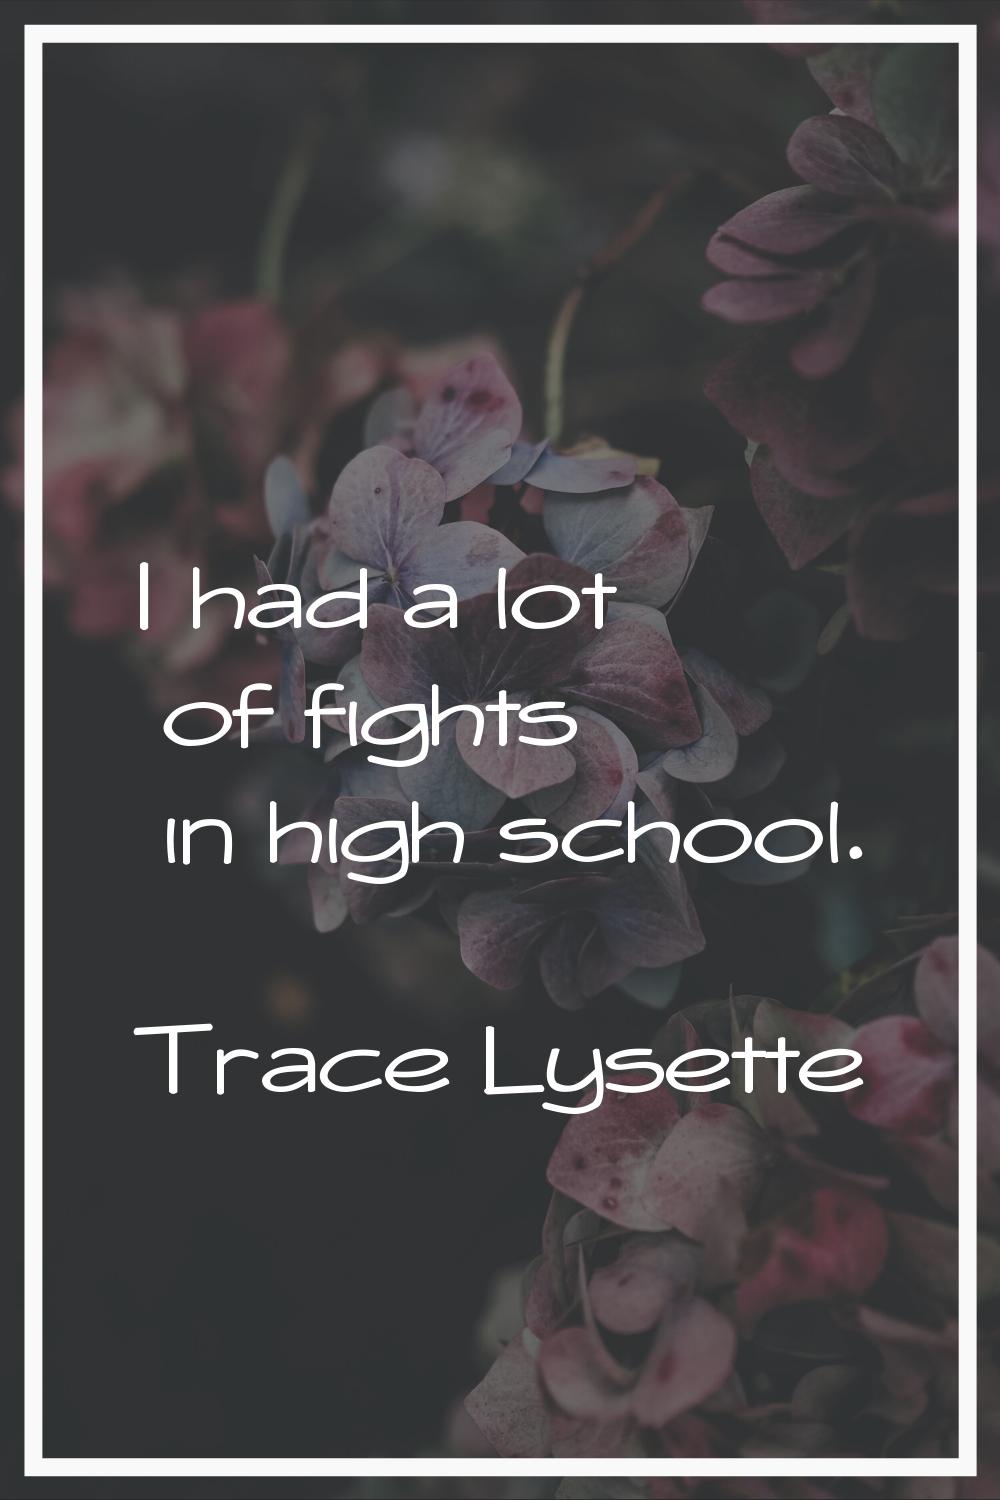 I had a lot of fights in high school.